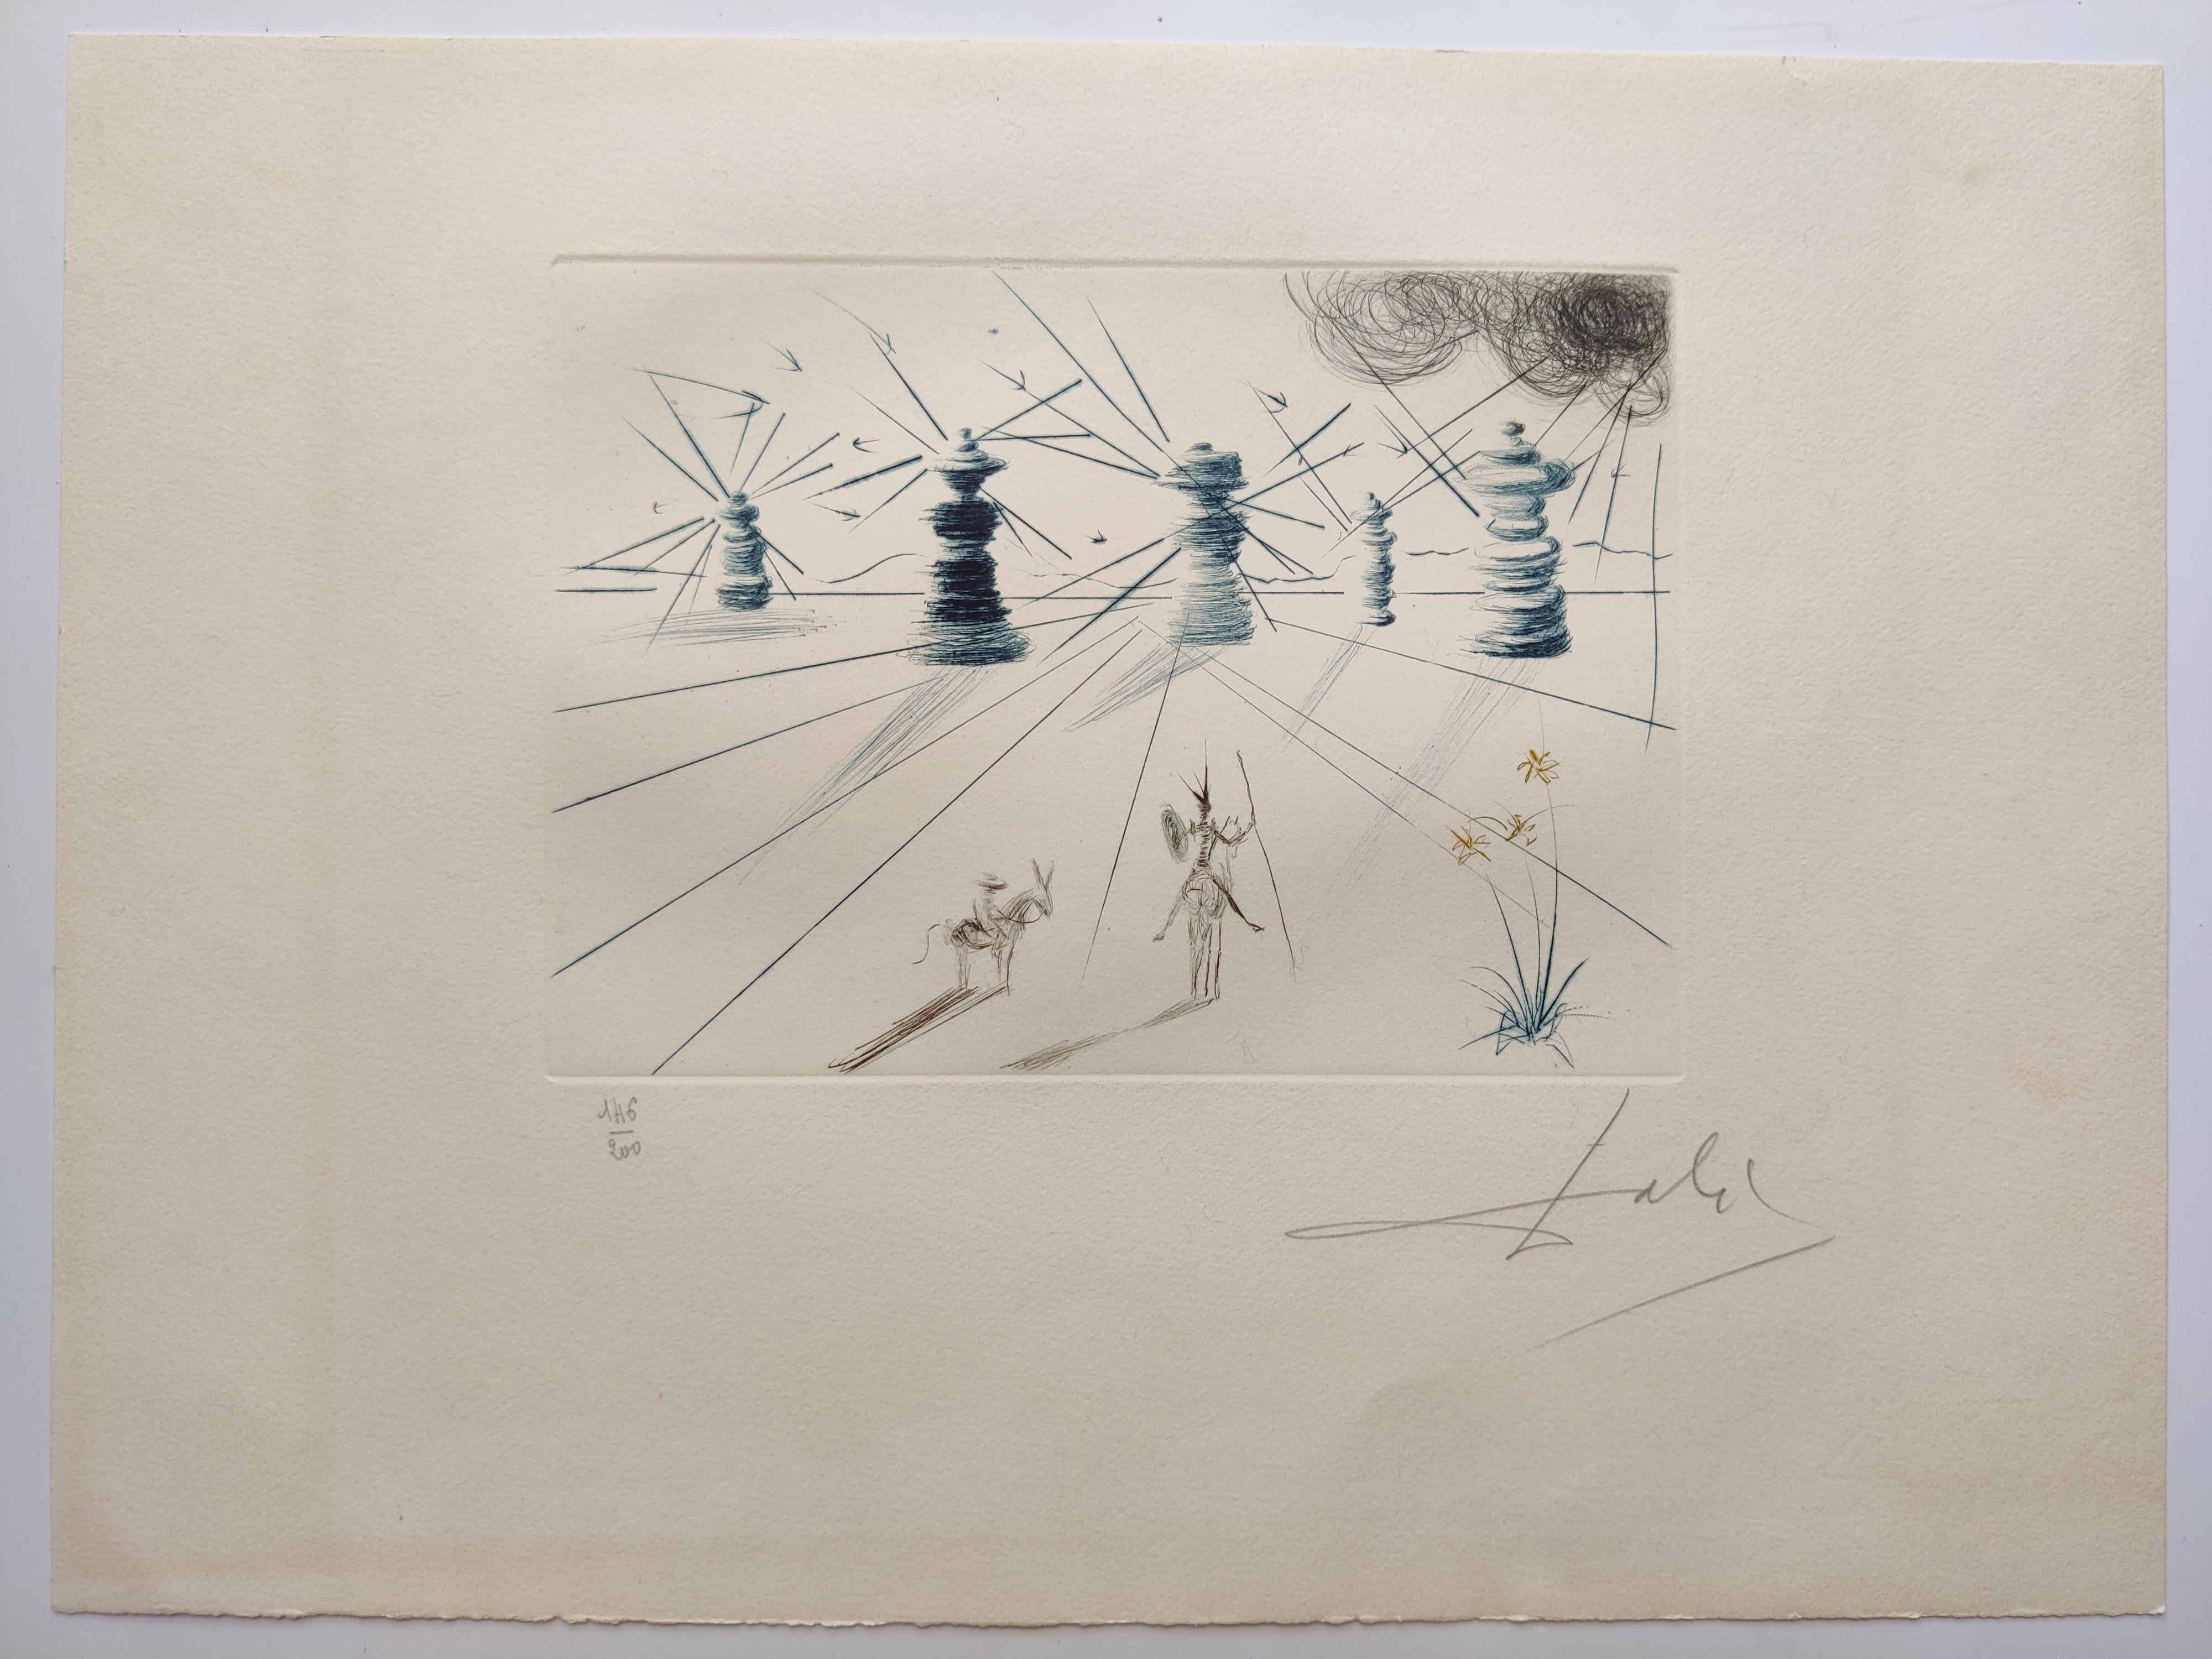 Salvador Dali 
Don Quichotte et Les Moulins a Vent, 1969
Dry point etching in colours on BFK Rives wove
Hand signed and numbered 146 / 200 in pencil
Sheet size 39.5 x 29.5 cm
Image size 21 x 15 cm
Printed by Ateliers Rigal, Fontenay-aux-Roses,